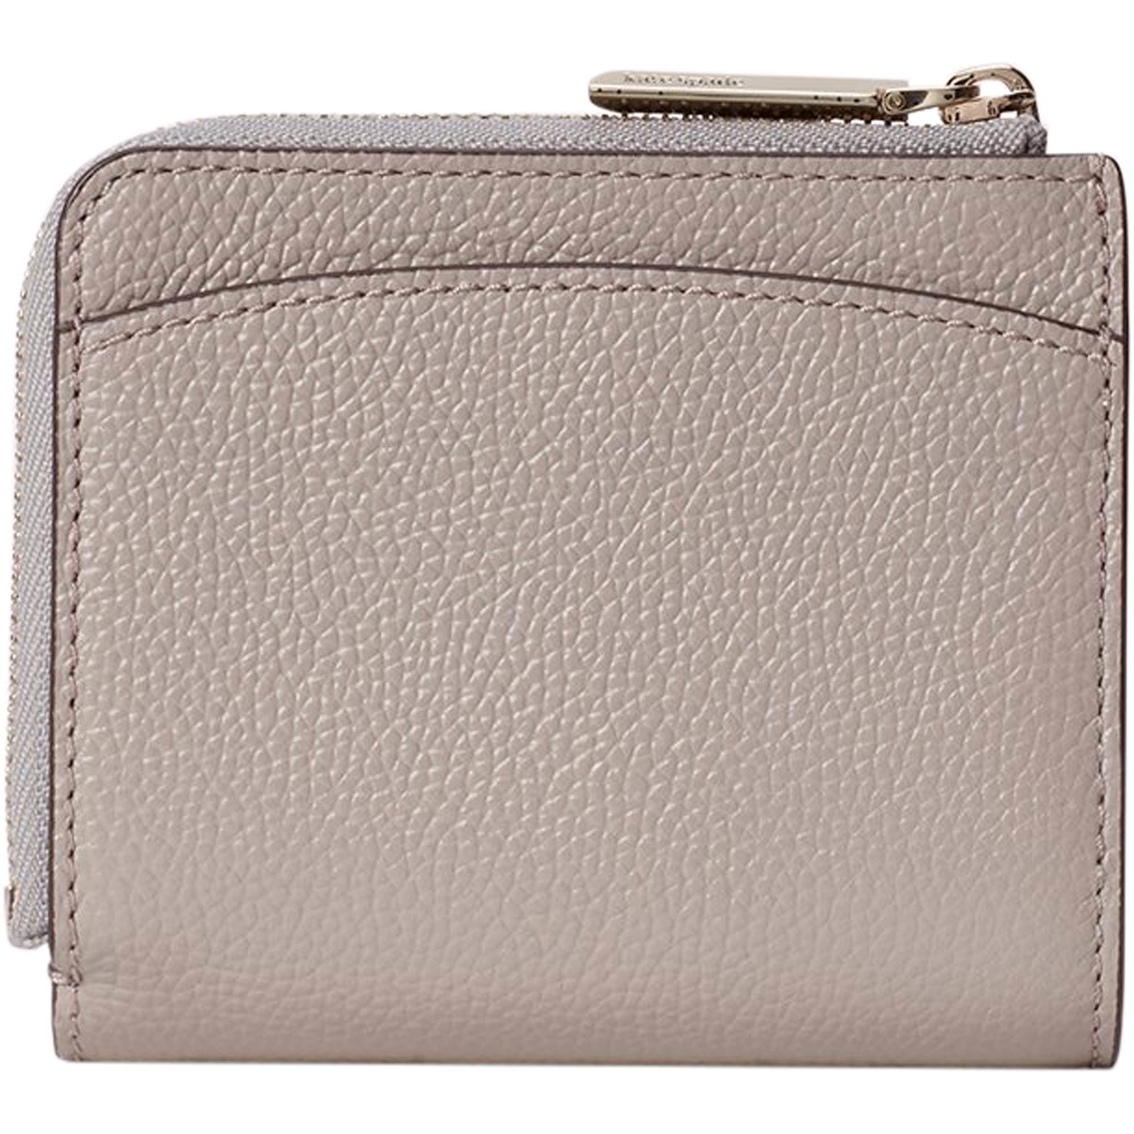 Kate Spade New York Margaux Small Leather Bifold Wallet | Wallets ...